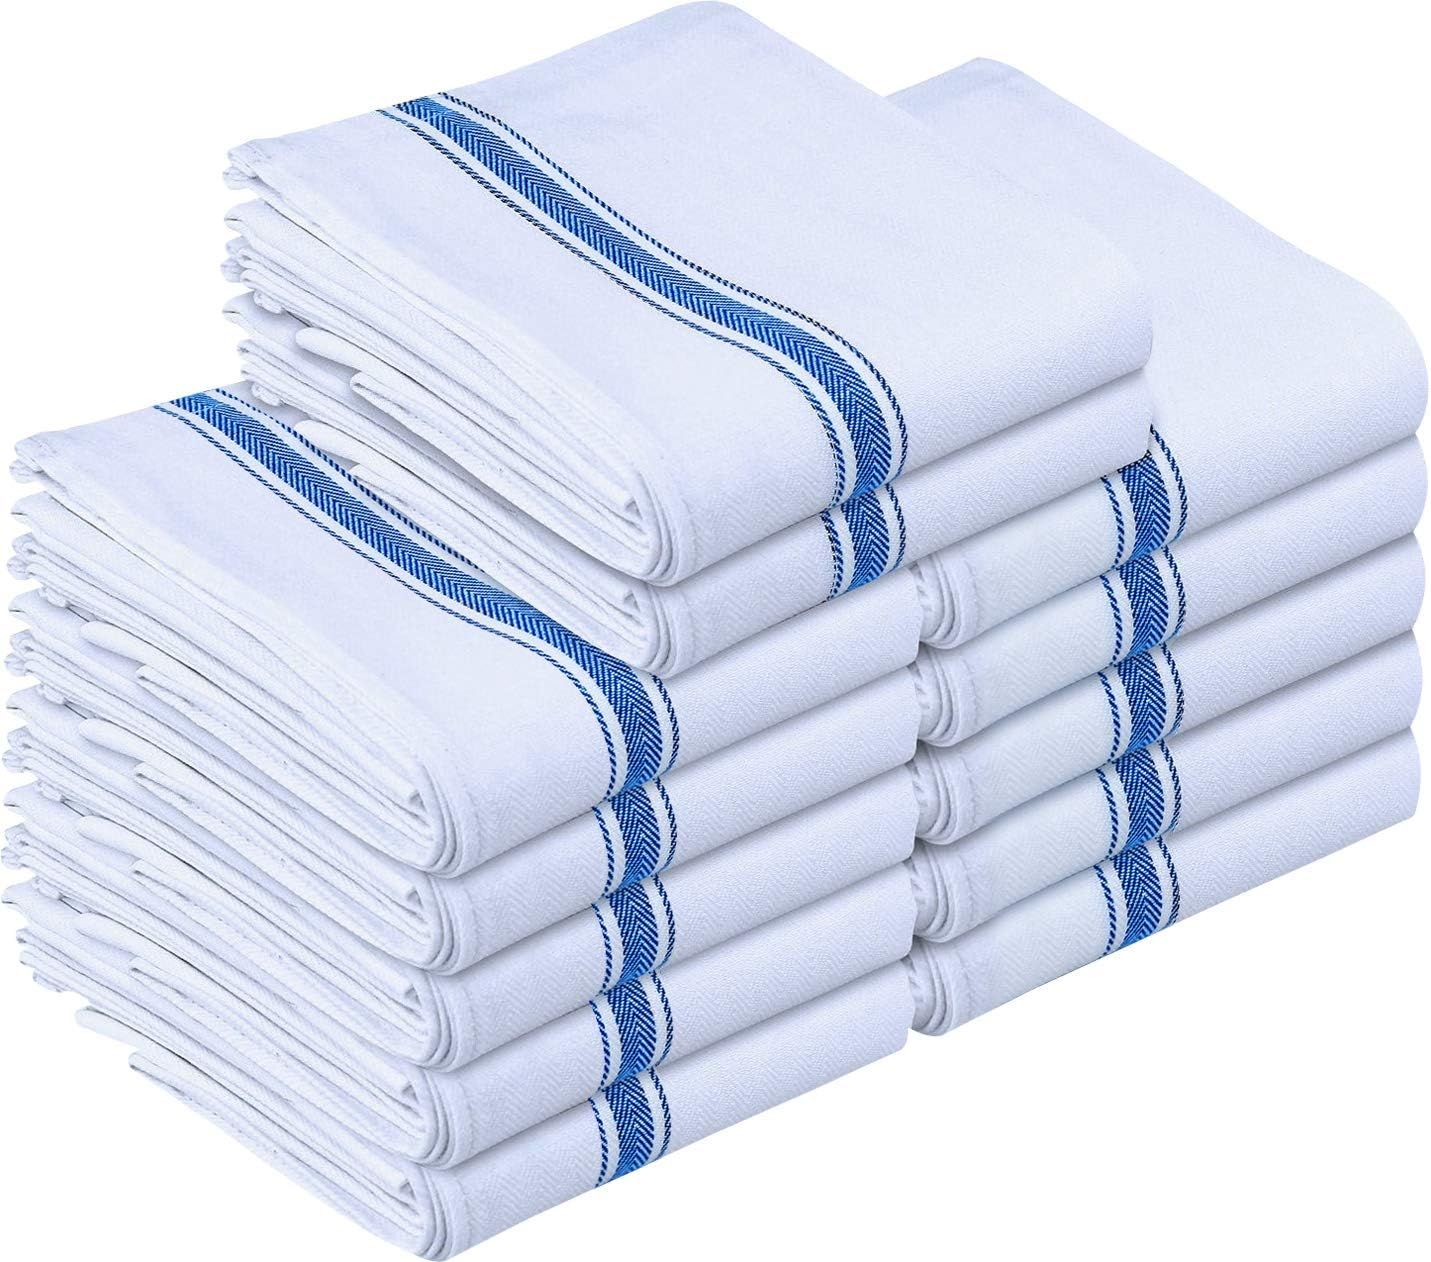 Utopia Towels 12 Pack Dish Towels - Reusable Kitchen Towels -15 x 25 Inches Ultra Soft Cotton Dish C | Amazon (US)